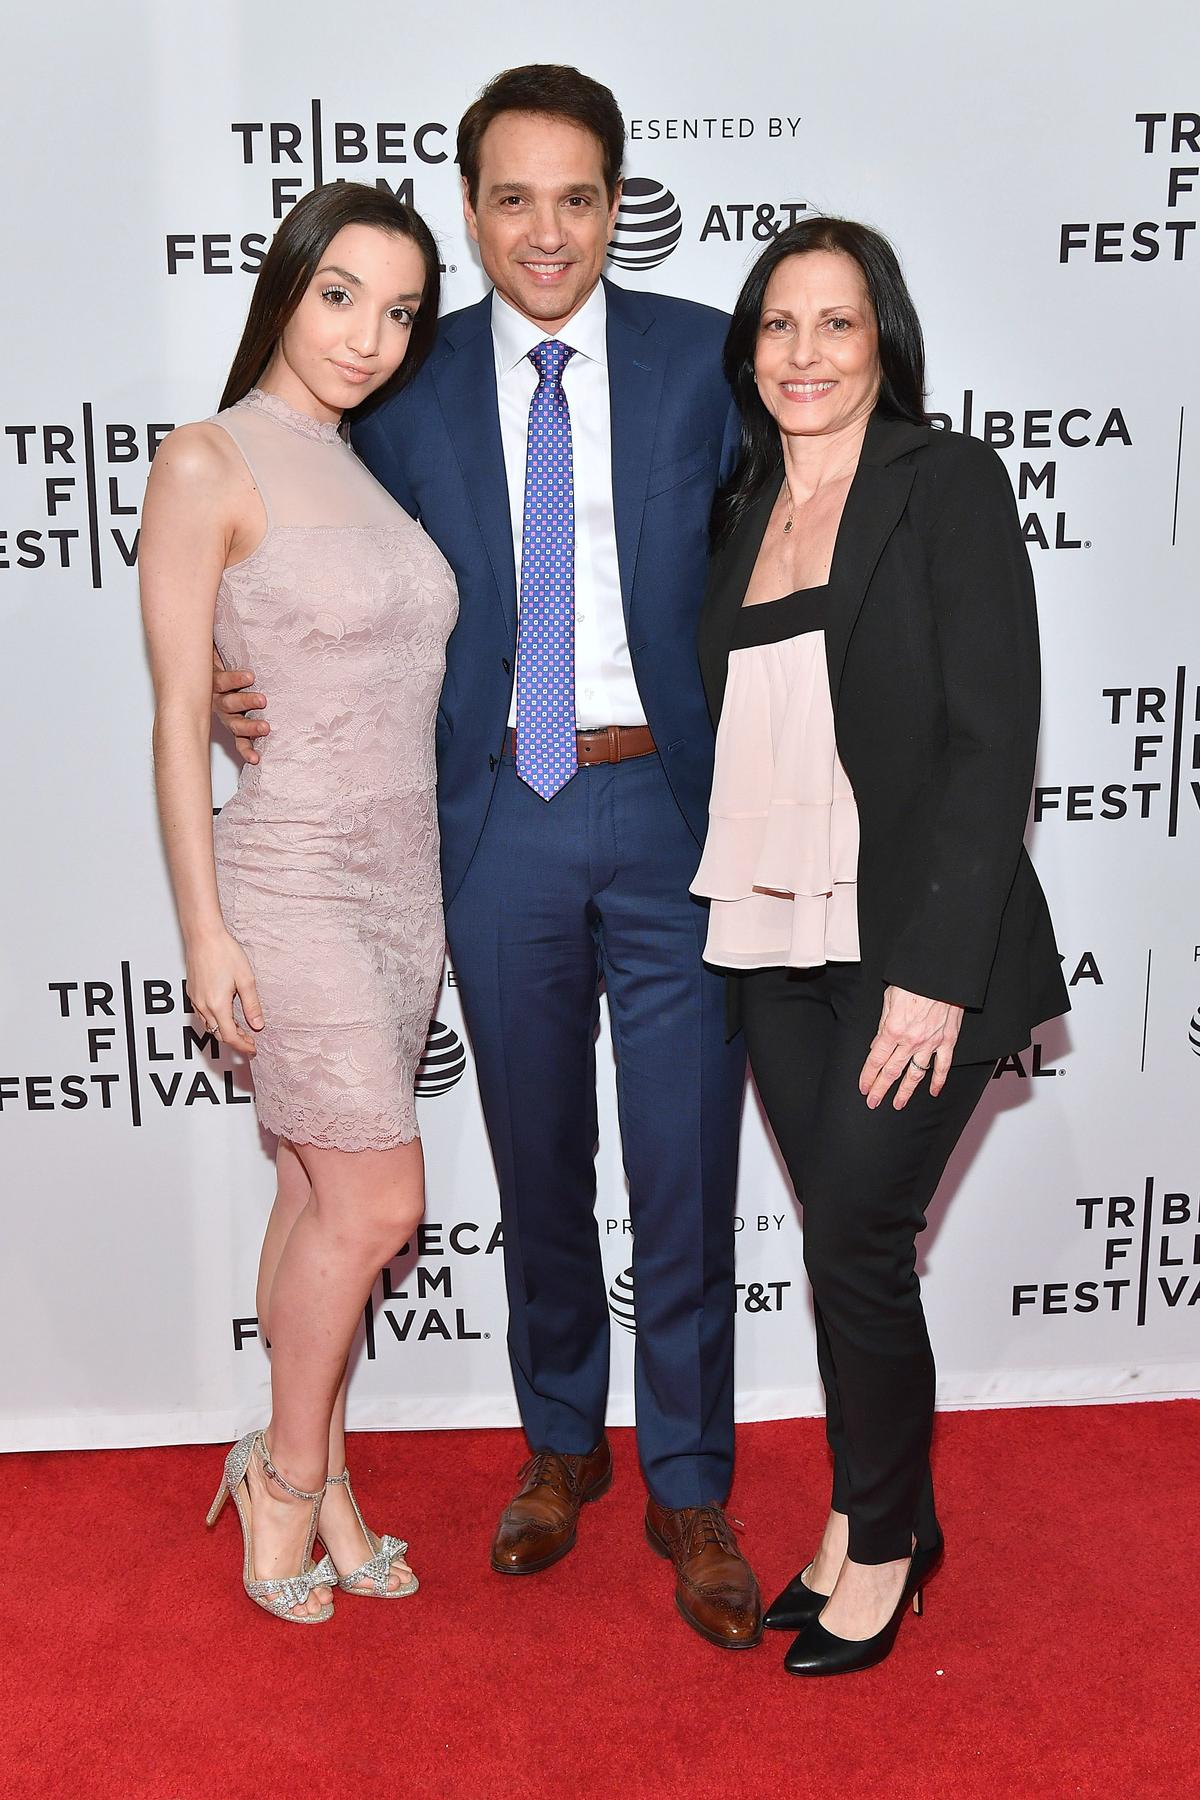 Julia Macchio, Ralph Macchio and Phyllis Fierro attend the screening of "Cobra Kai" during the 2018 Tribeca Film Festival at SVA Theatre on April 24, 2018, in New York City. (Dia Dipasupil/Getty Images)